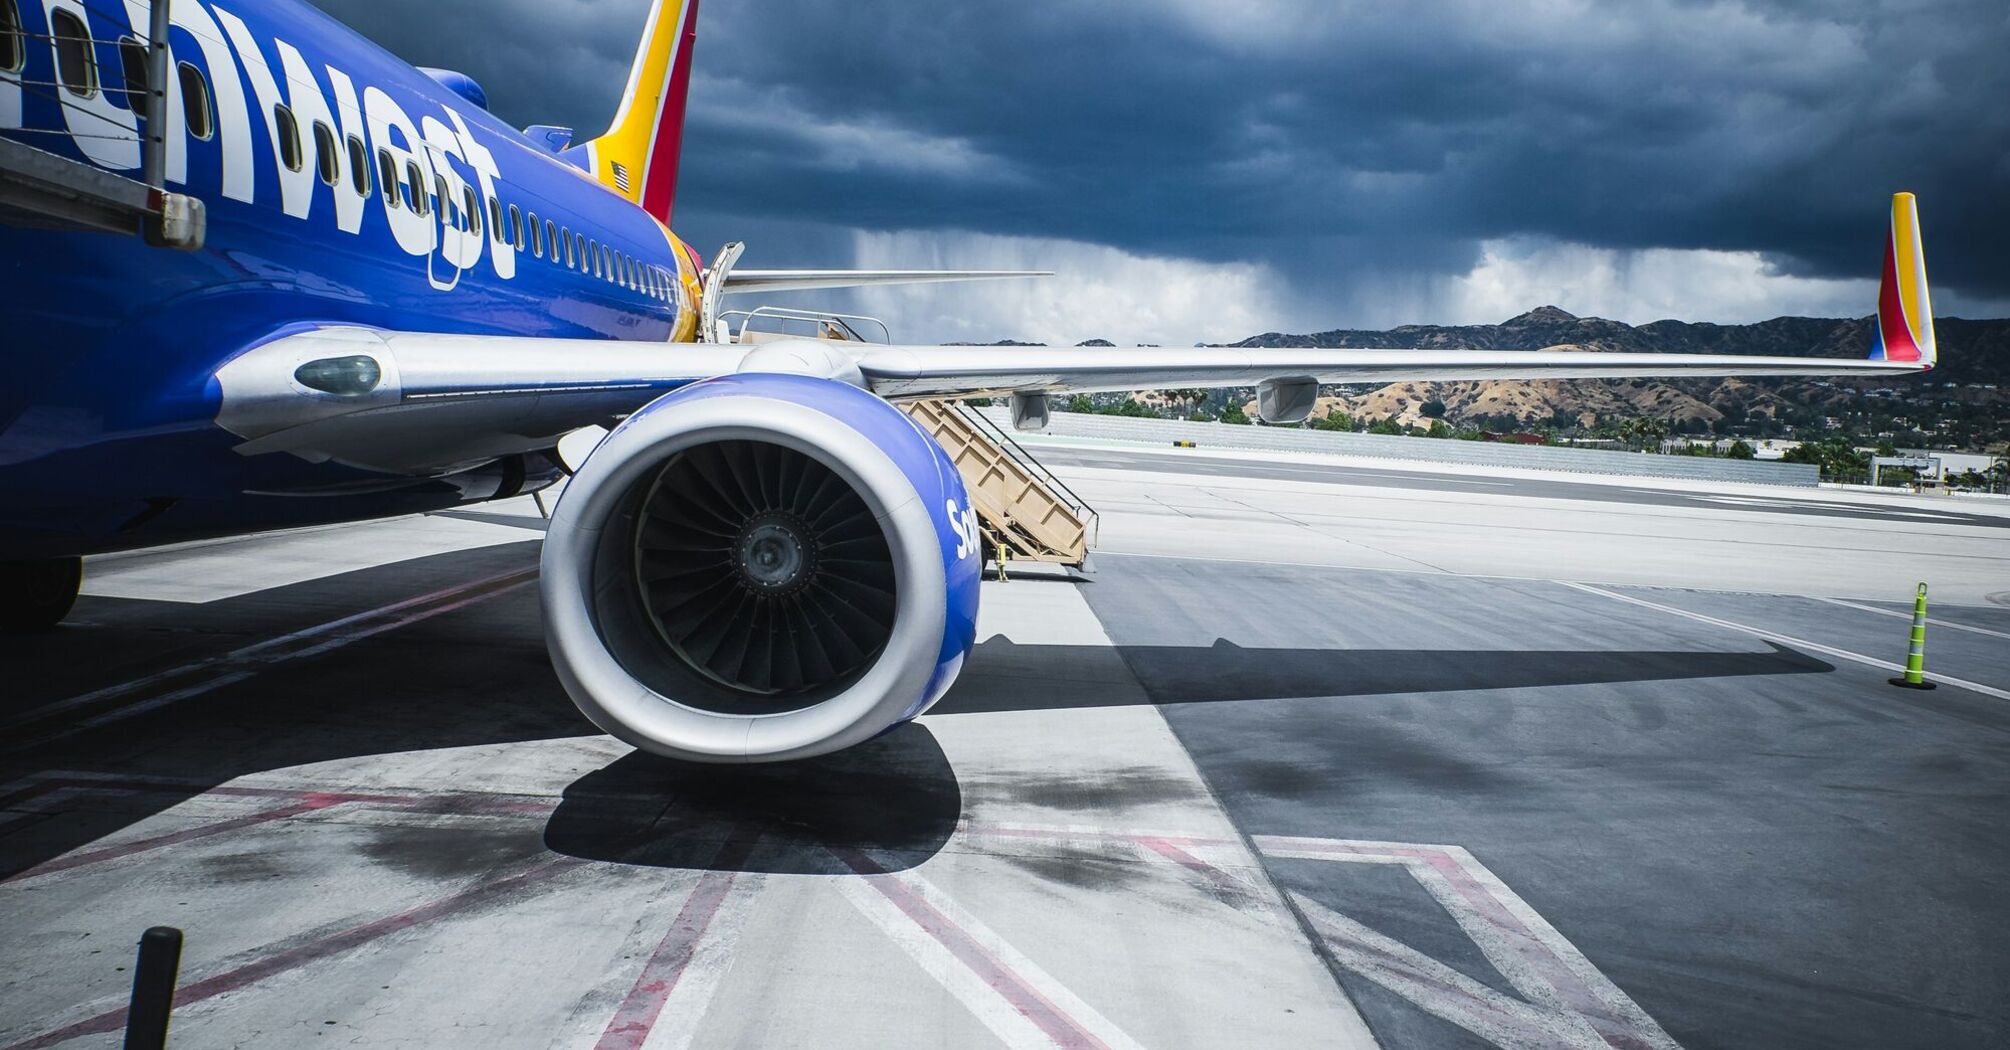 A Southwest Airlines plane parked on the tarmac with its front boarding stairs down, under a stormy sky